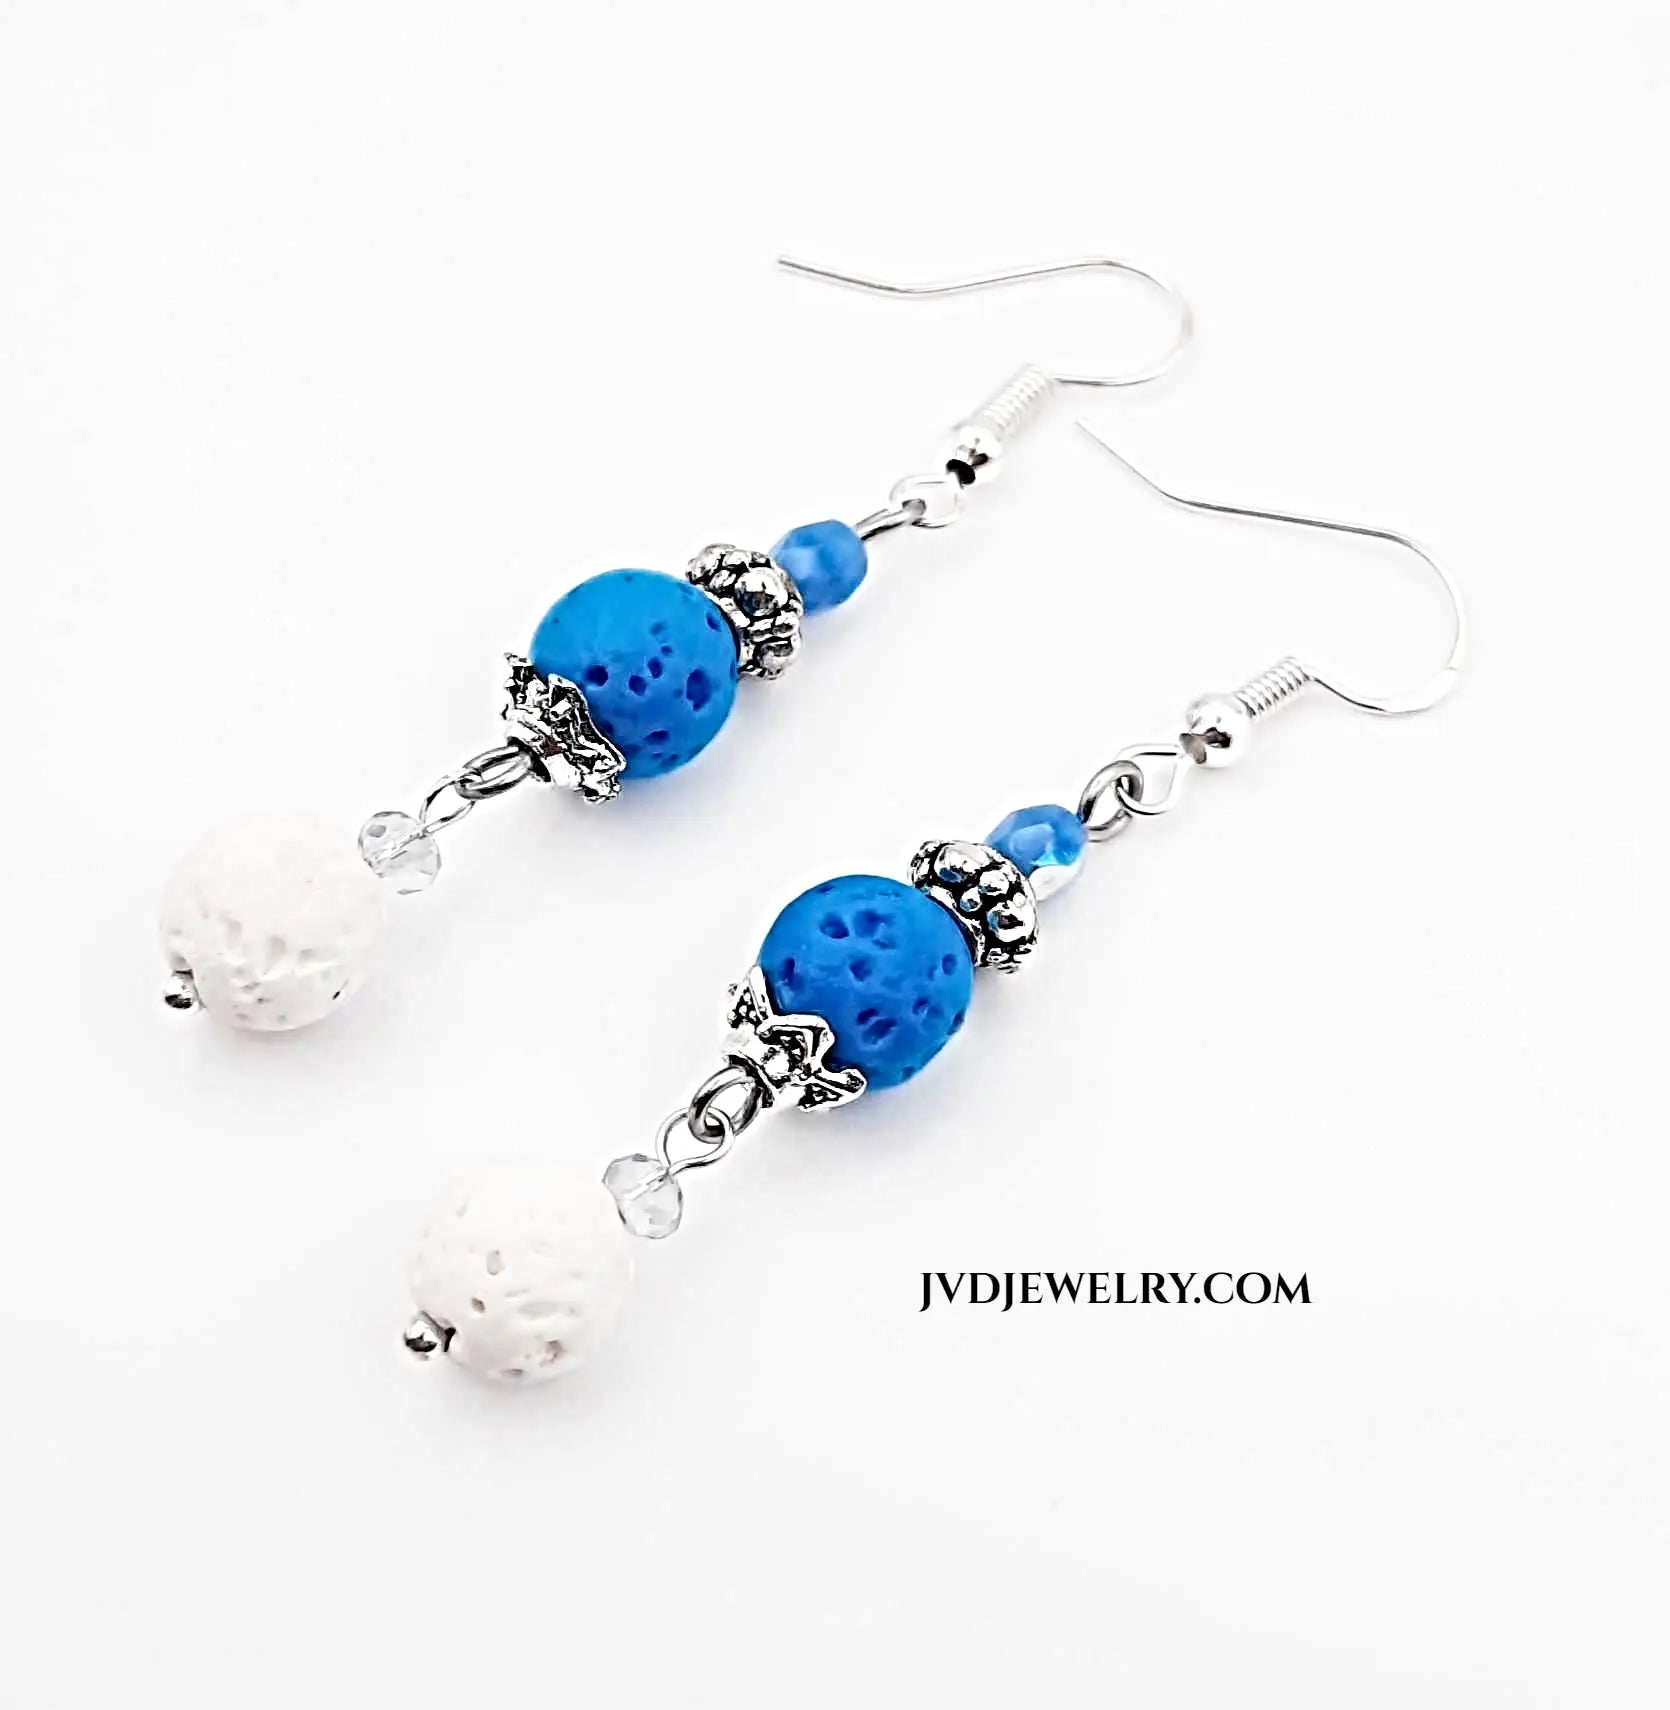 Blue and white lava beads with Lavender scent from essential oil earrings - Image #1